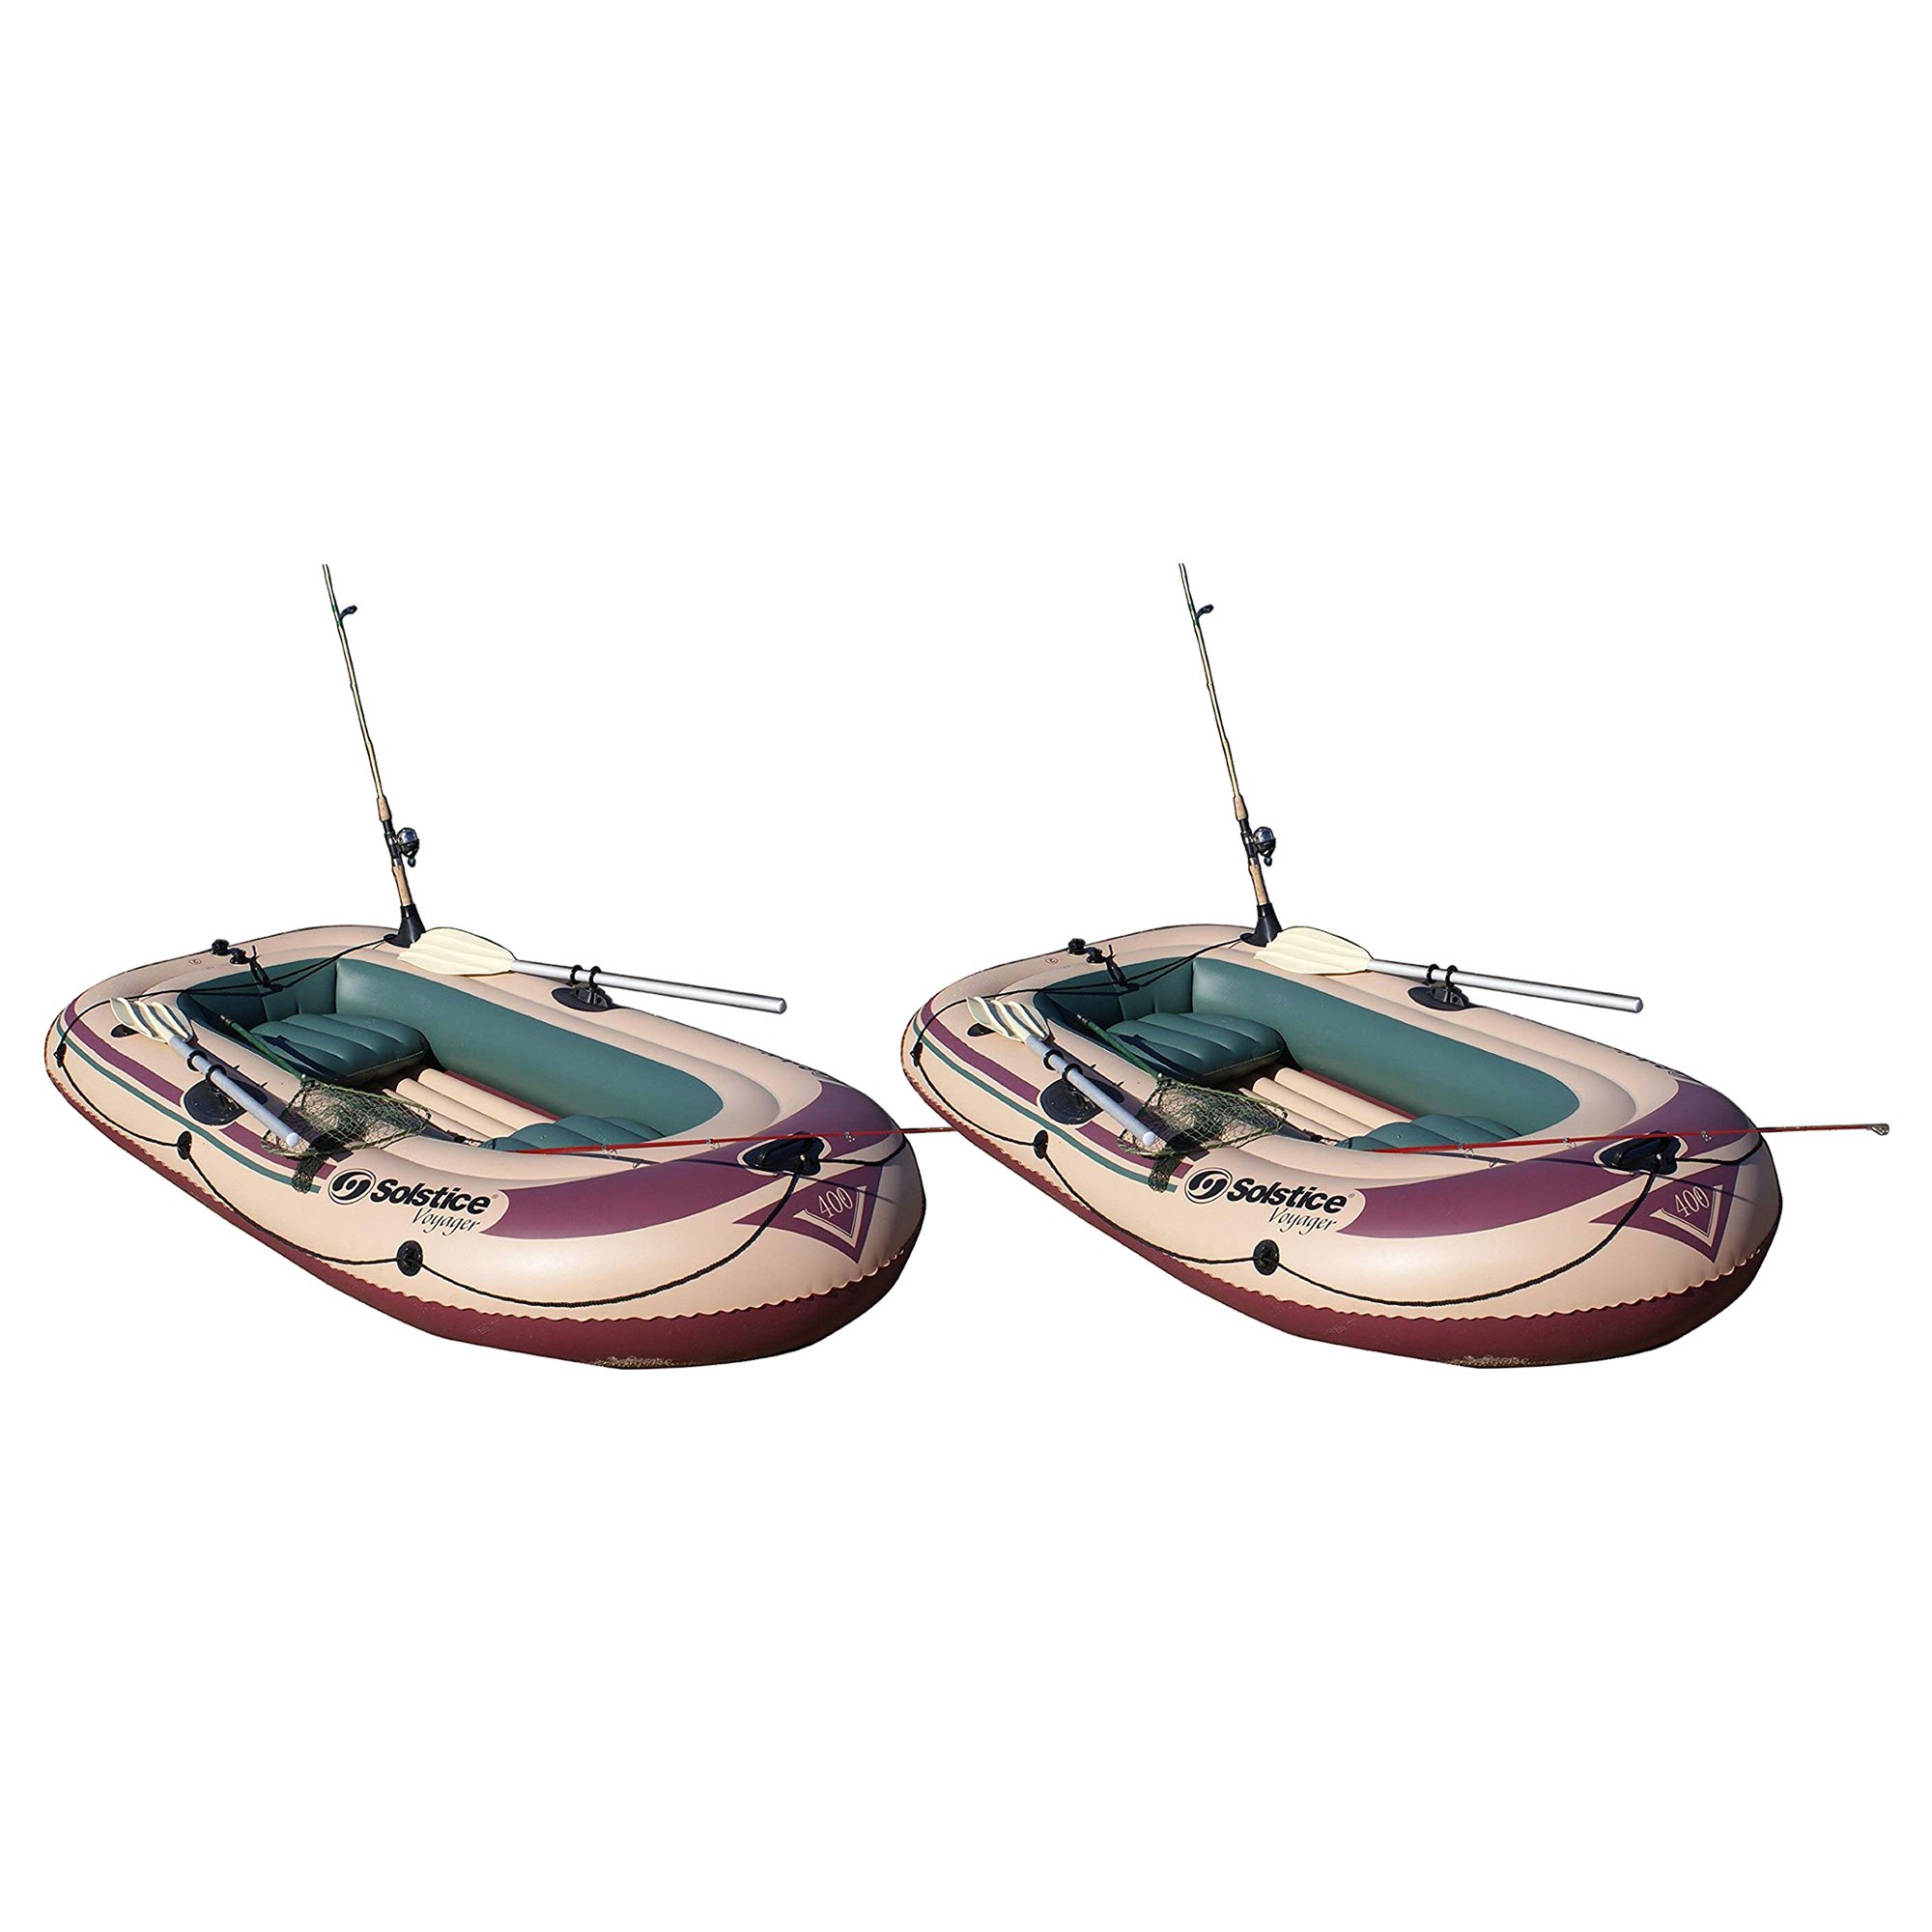 SOLSTICE Inflatable Fishing Boat Rafts 2 to 6 Person Options for Adults  Compatible with Motor Comes W/Accessories Pole Holders Cushions Grab Line 6  to